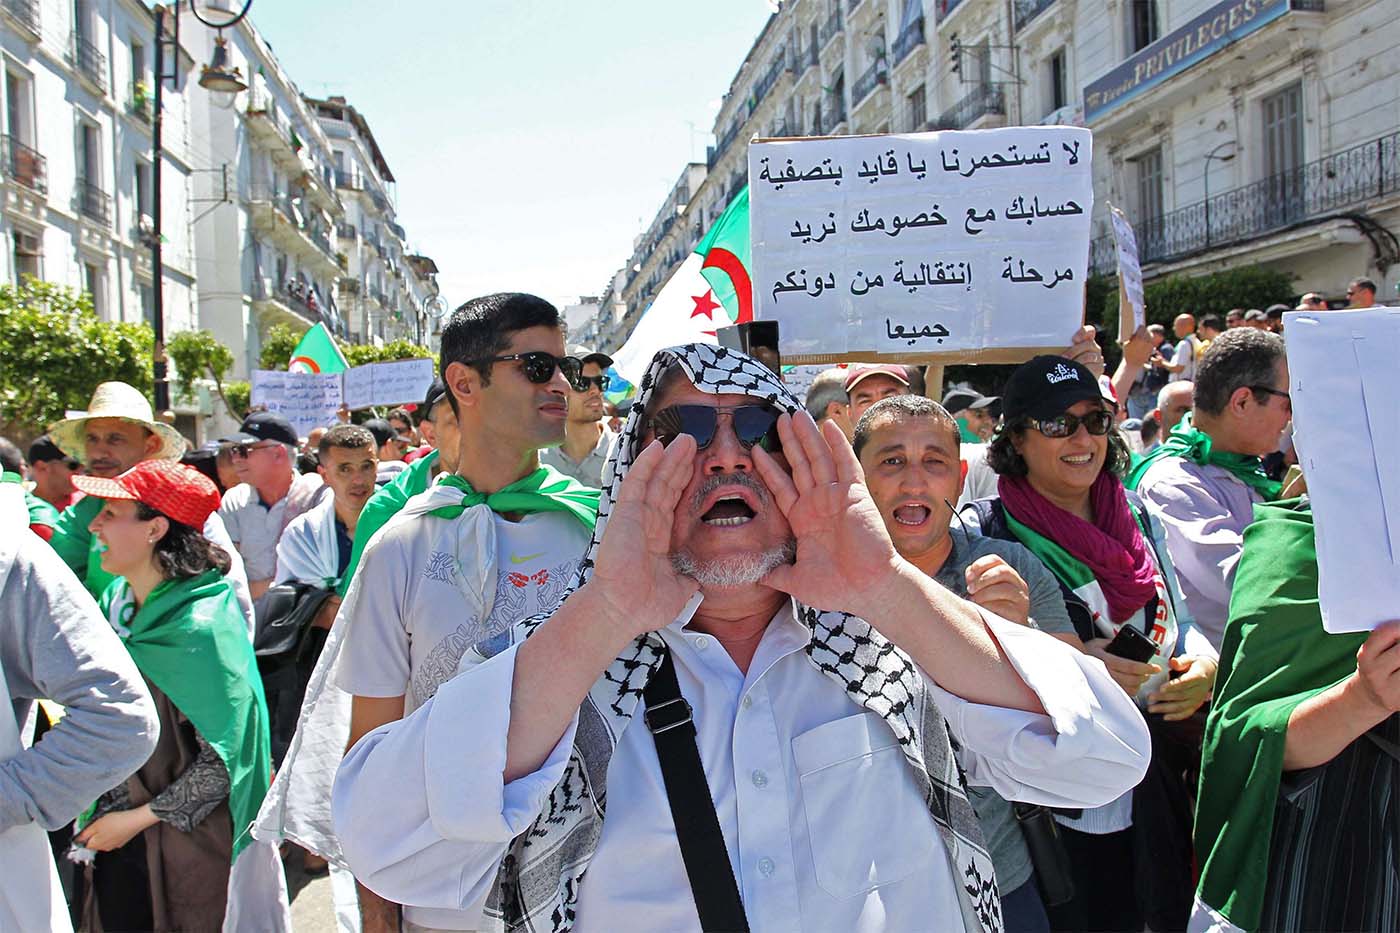 Algerian protesters chant slogans as they take part in an anti-government demonstration in Algiers 